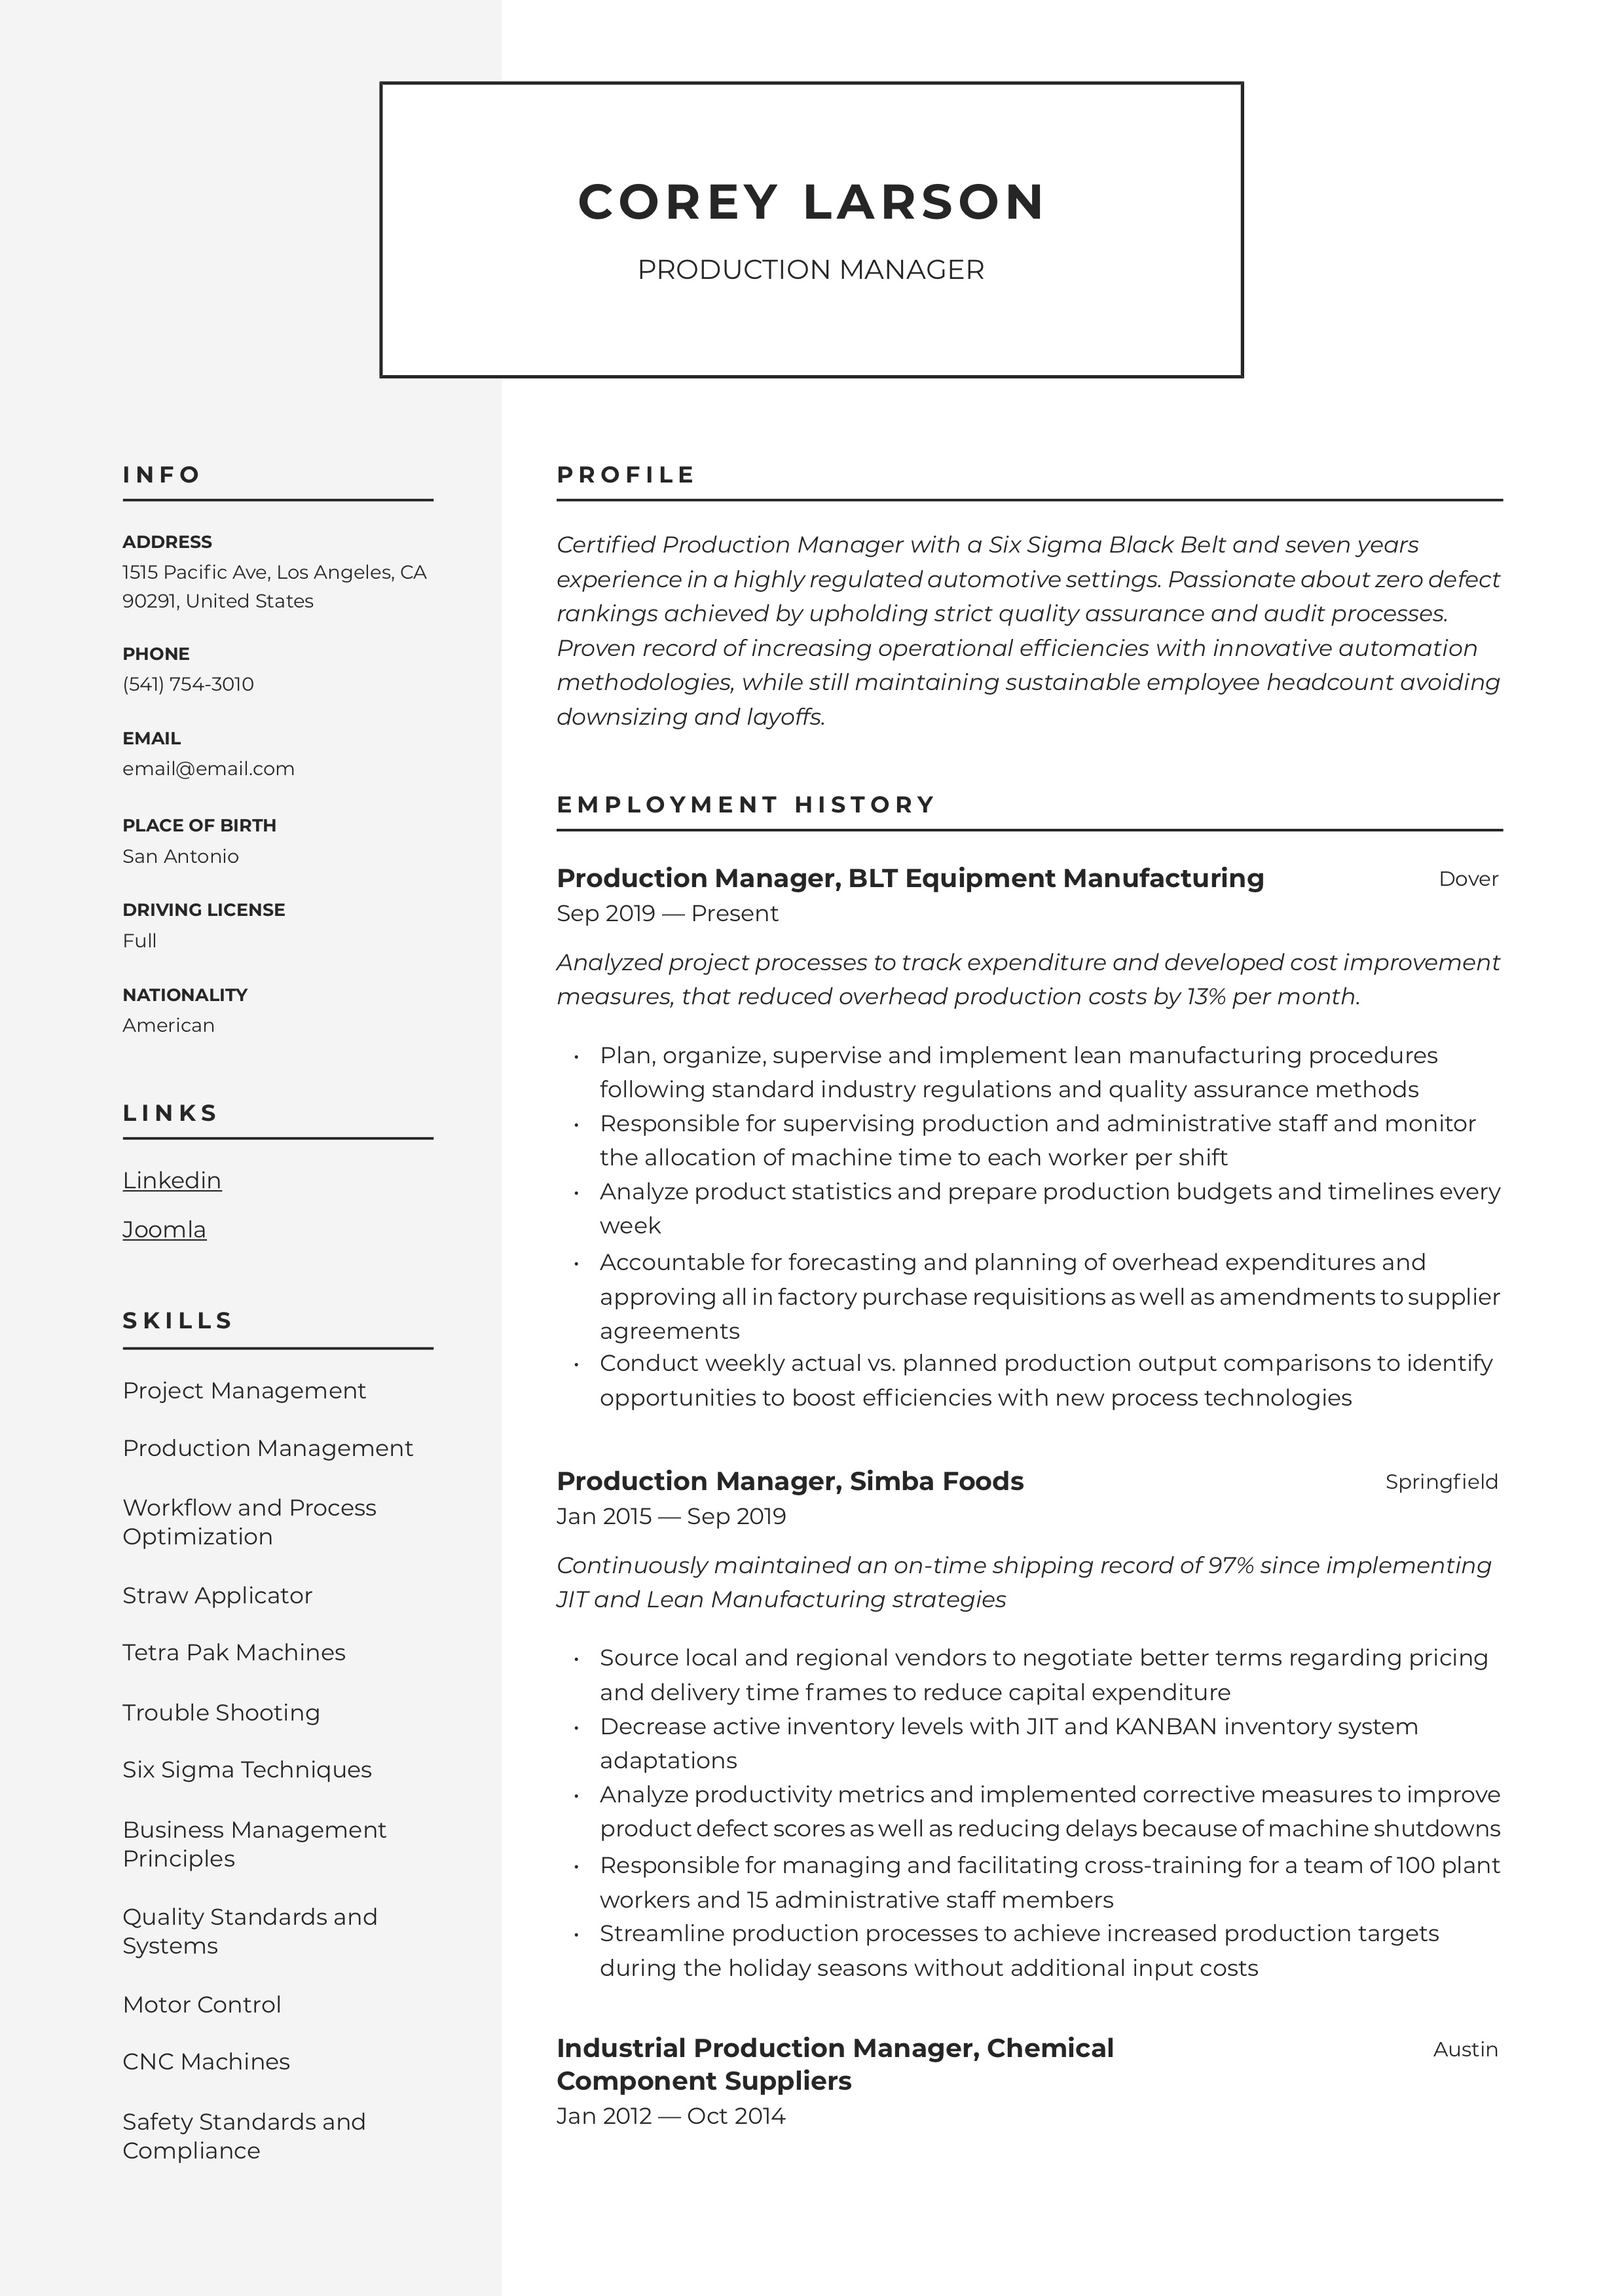 Resume Template Production Manager